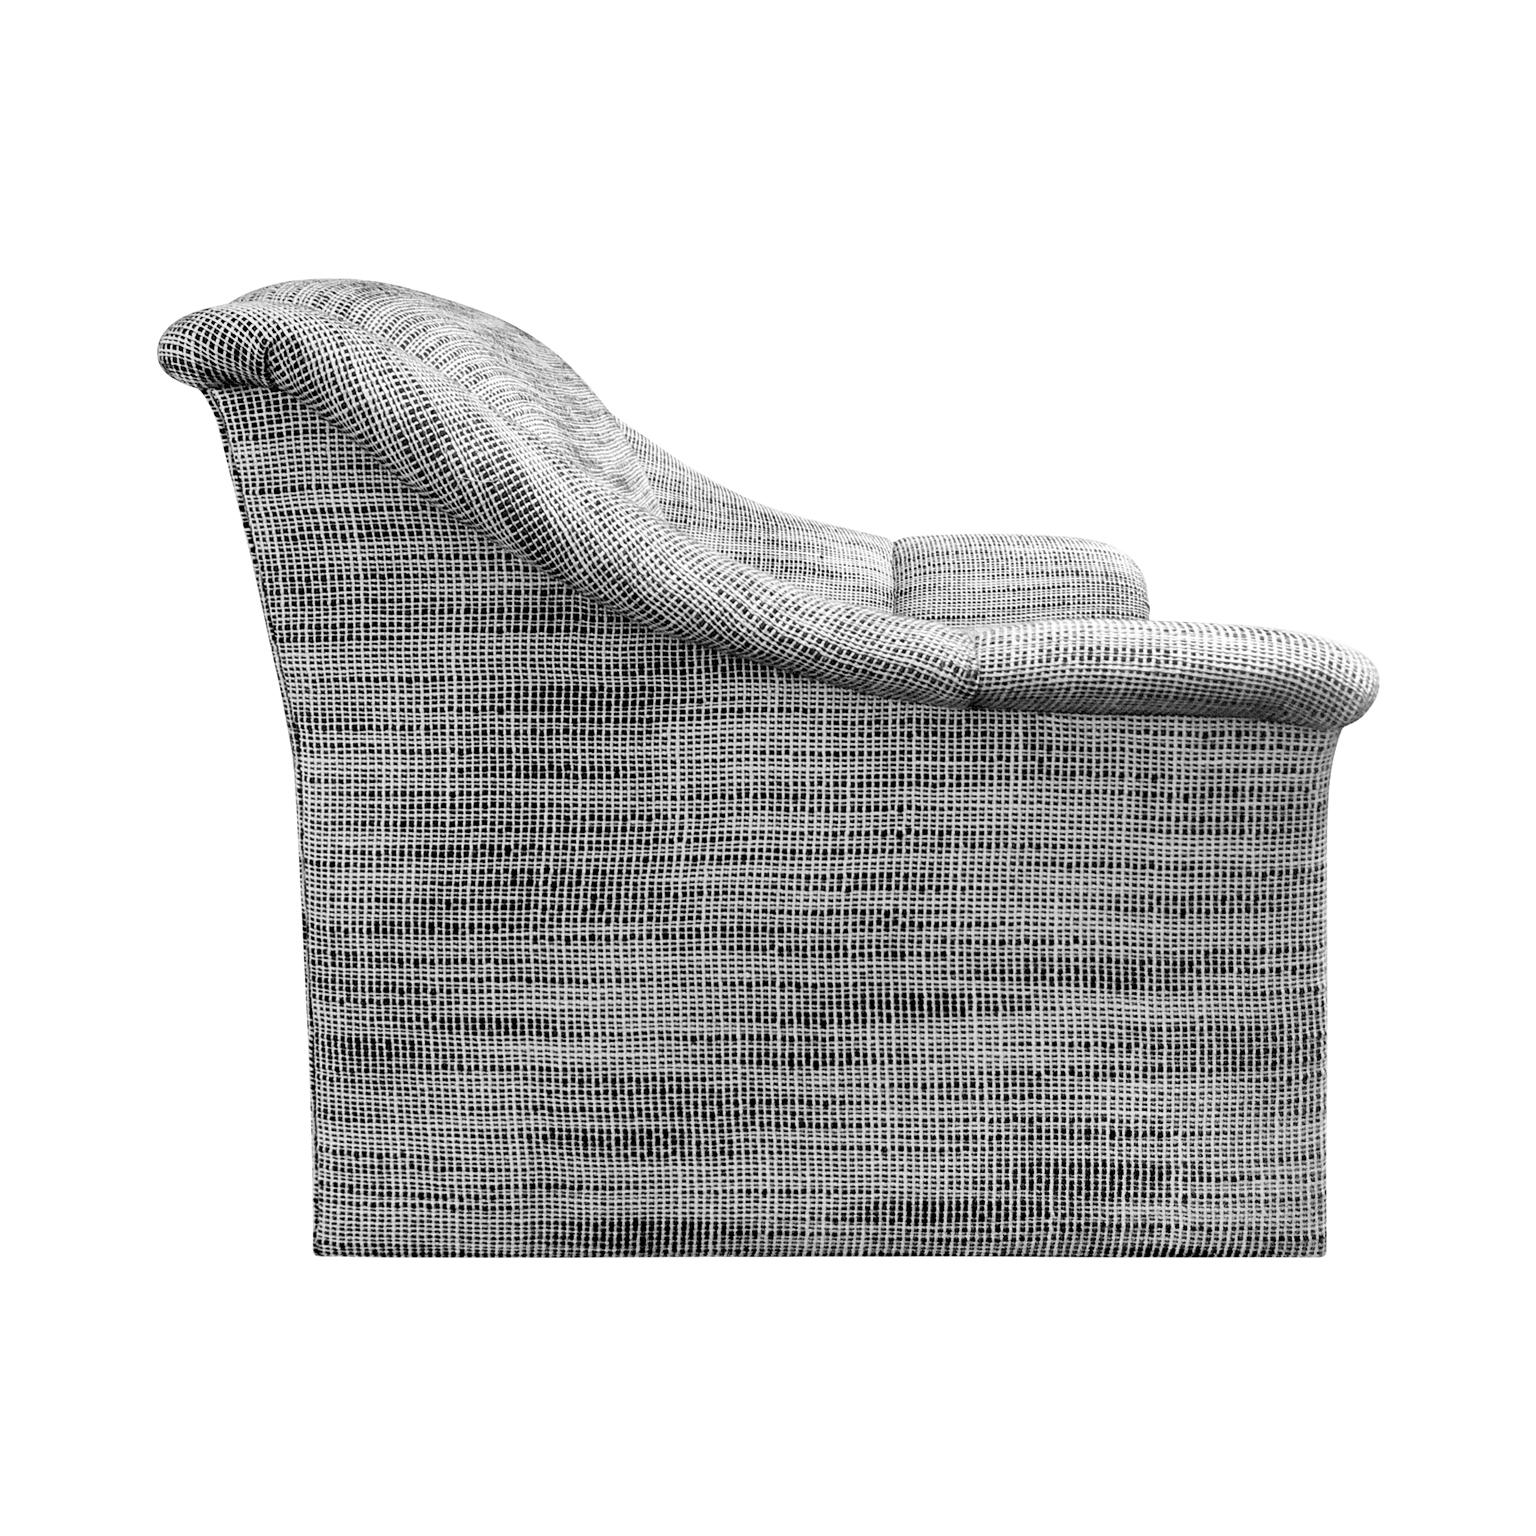 Modernist lounge chair in black and white wool basketweave upholstery. USA, 1970s.